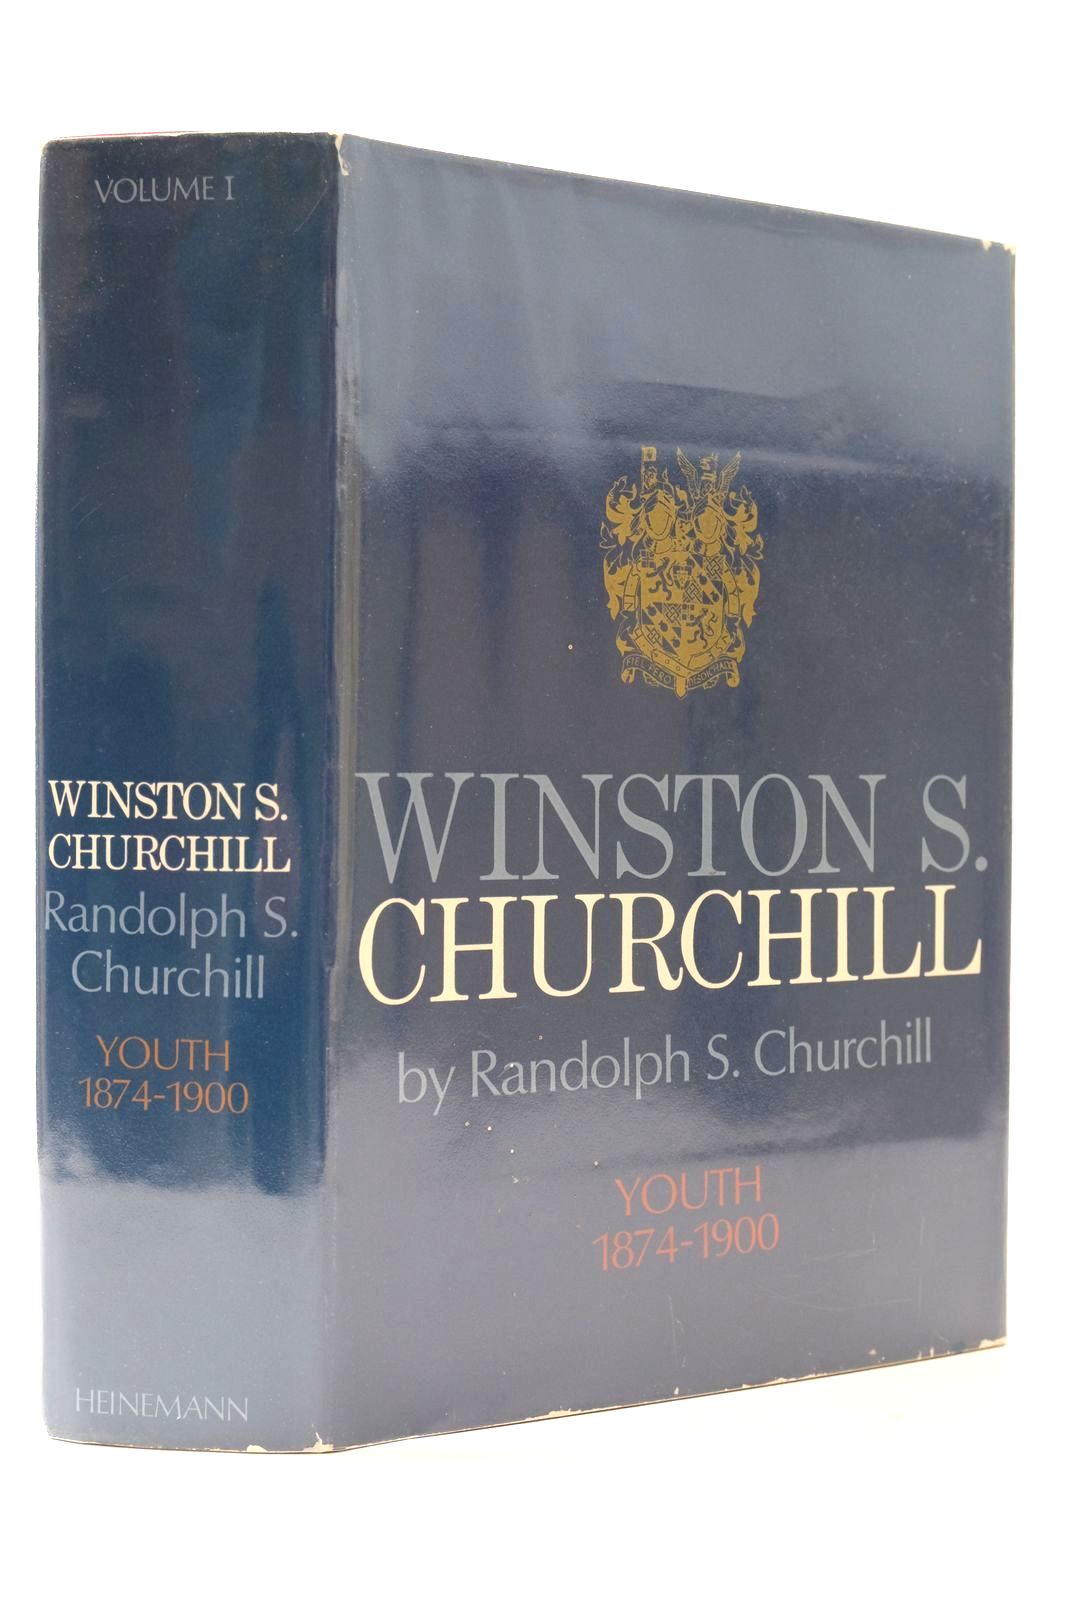 Photo of WINSTON S. CHURCHILL VOLUME I YOUTH 1874-1900 written by Churchill, Randolph S. published by Heinemann (STOCK CODE: 2132683)  for sale by Stella & Rose's Books